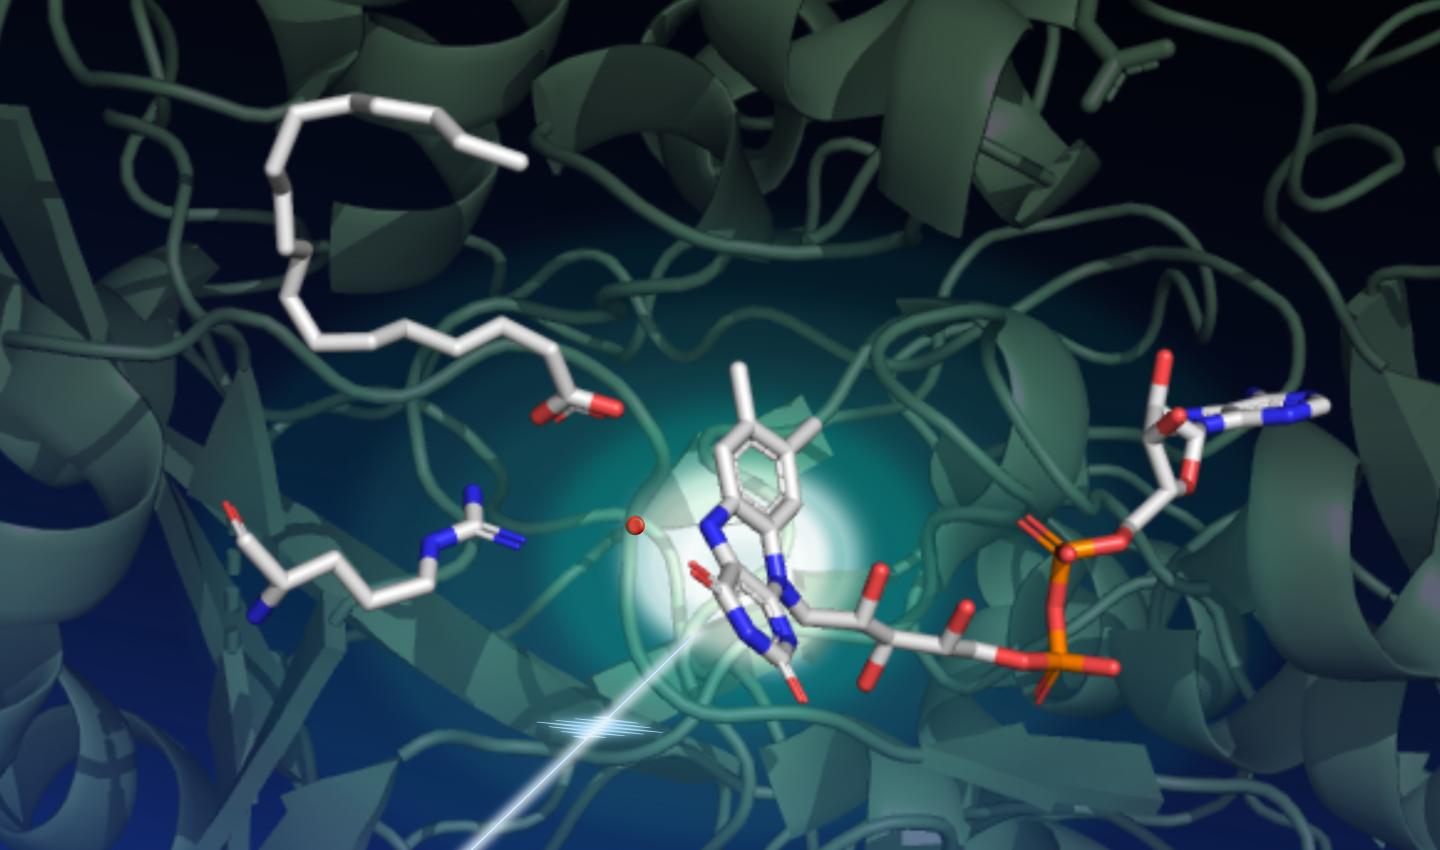 An enzyme converts fatty acids to fuel ingredients with light